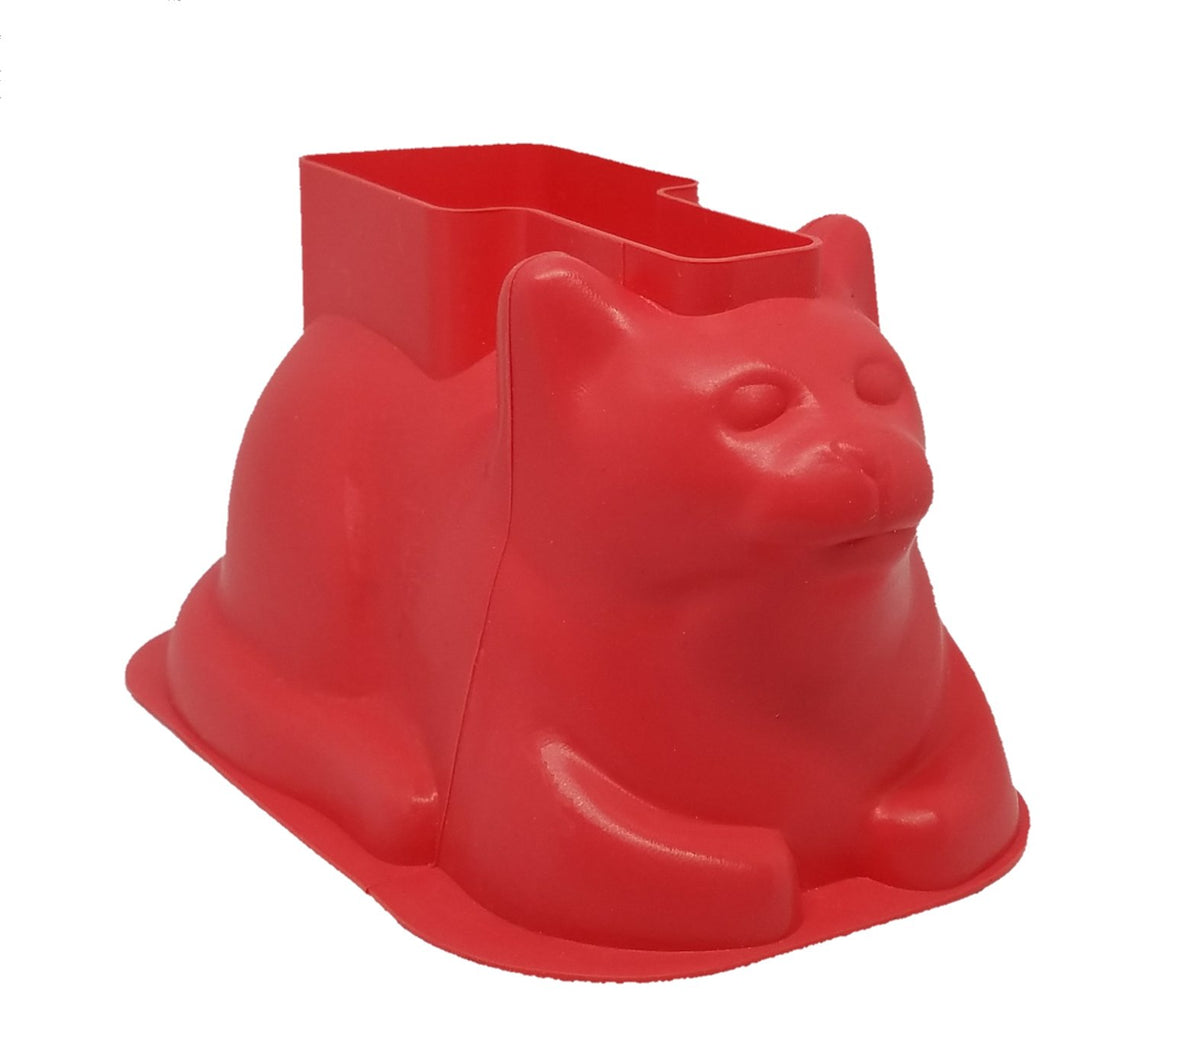 Cat Lady's 2-Pack Cat Shaped Silicone Ice Cube/Chocolate/Jello